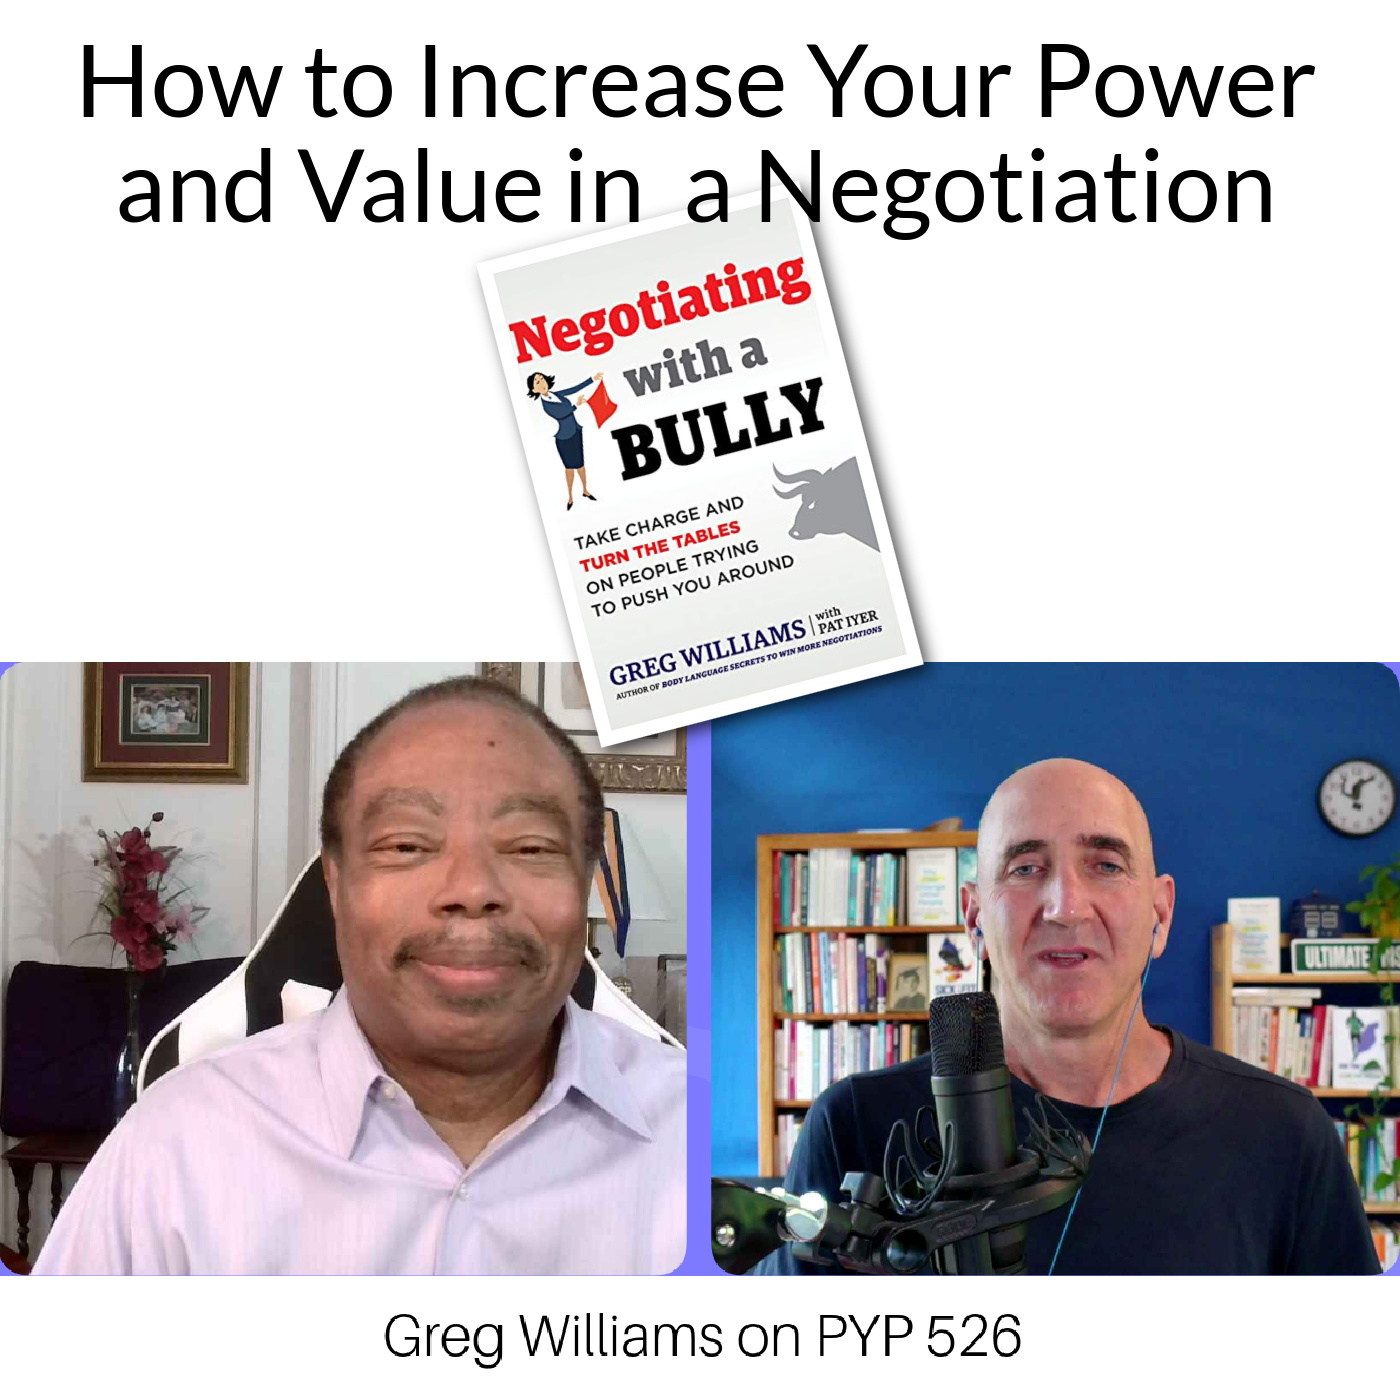 How to Increase your Power and Value in a Negotiation: Greg Williams on PYP 526